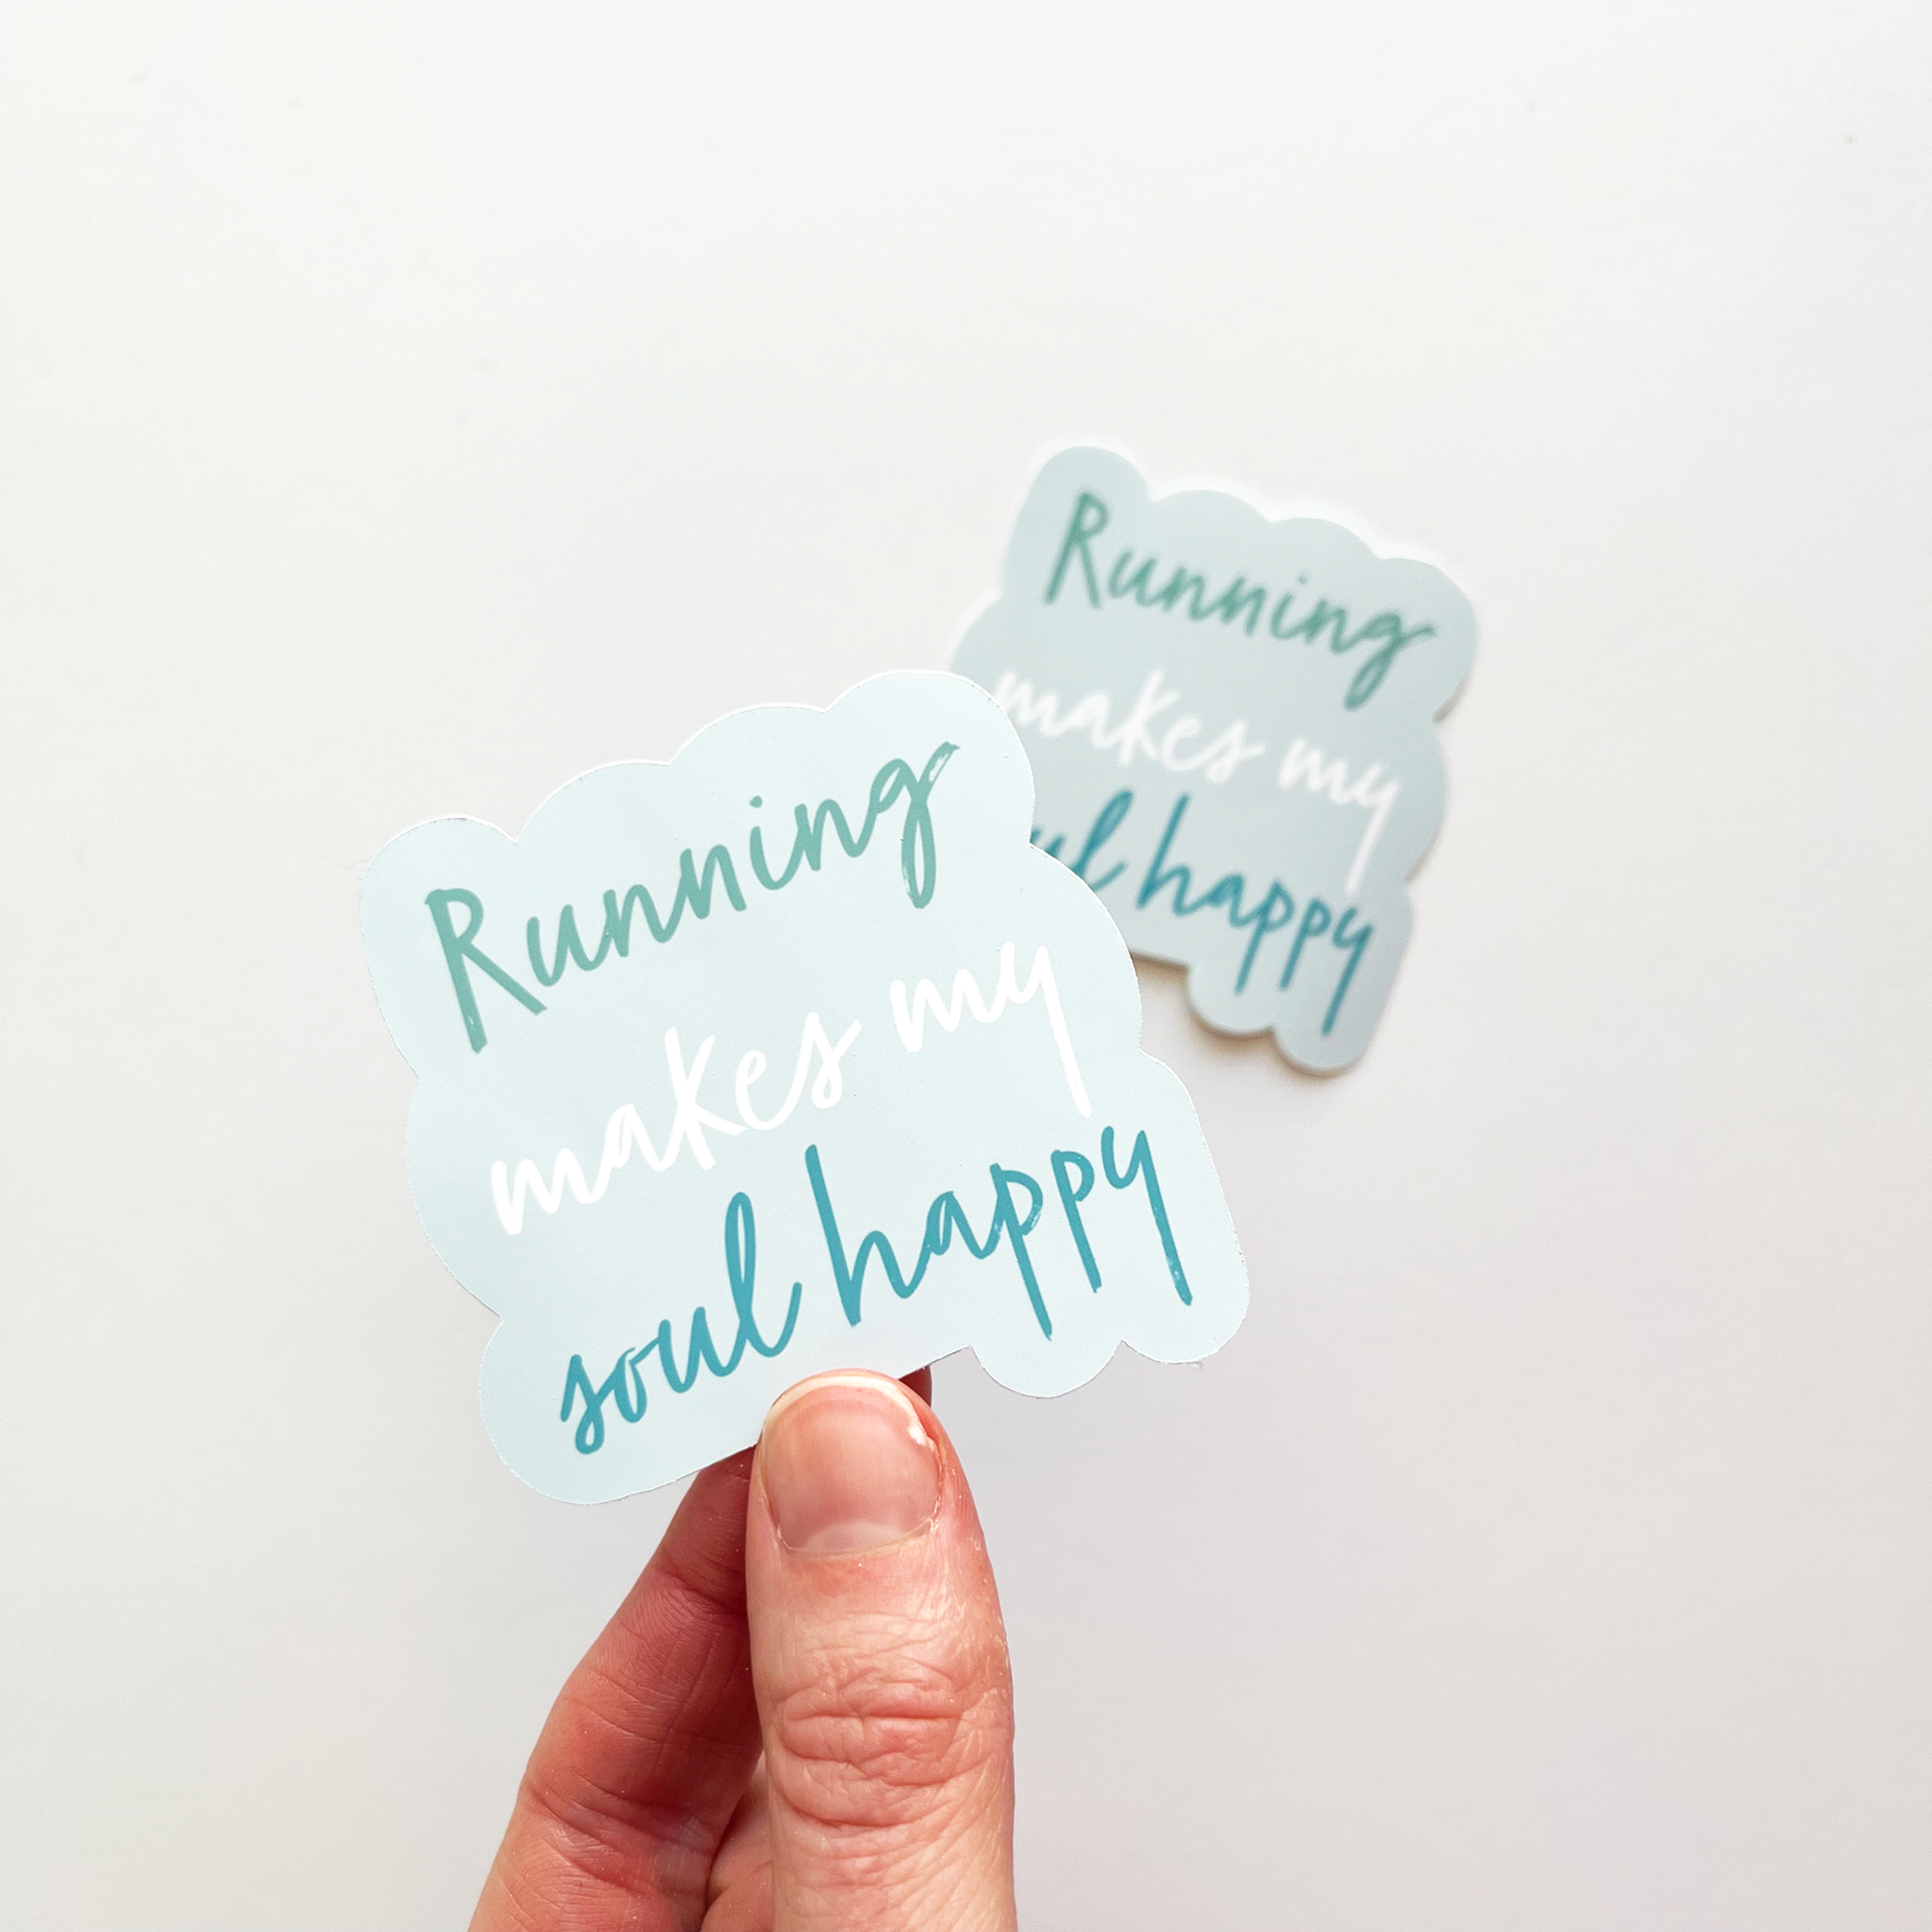 Running makes my soul happy sticker with light blue background. Word running is in teal, the words makes my are in white and the worlds soul happy are in dark blue